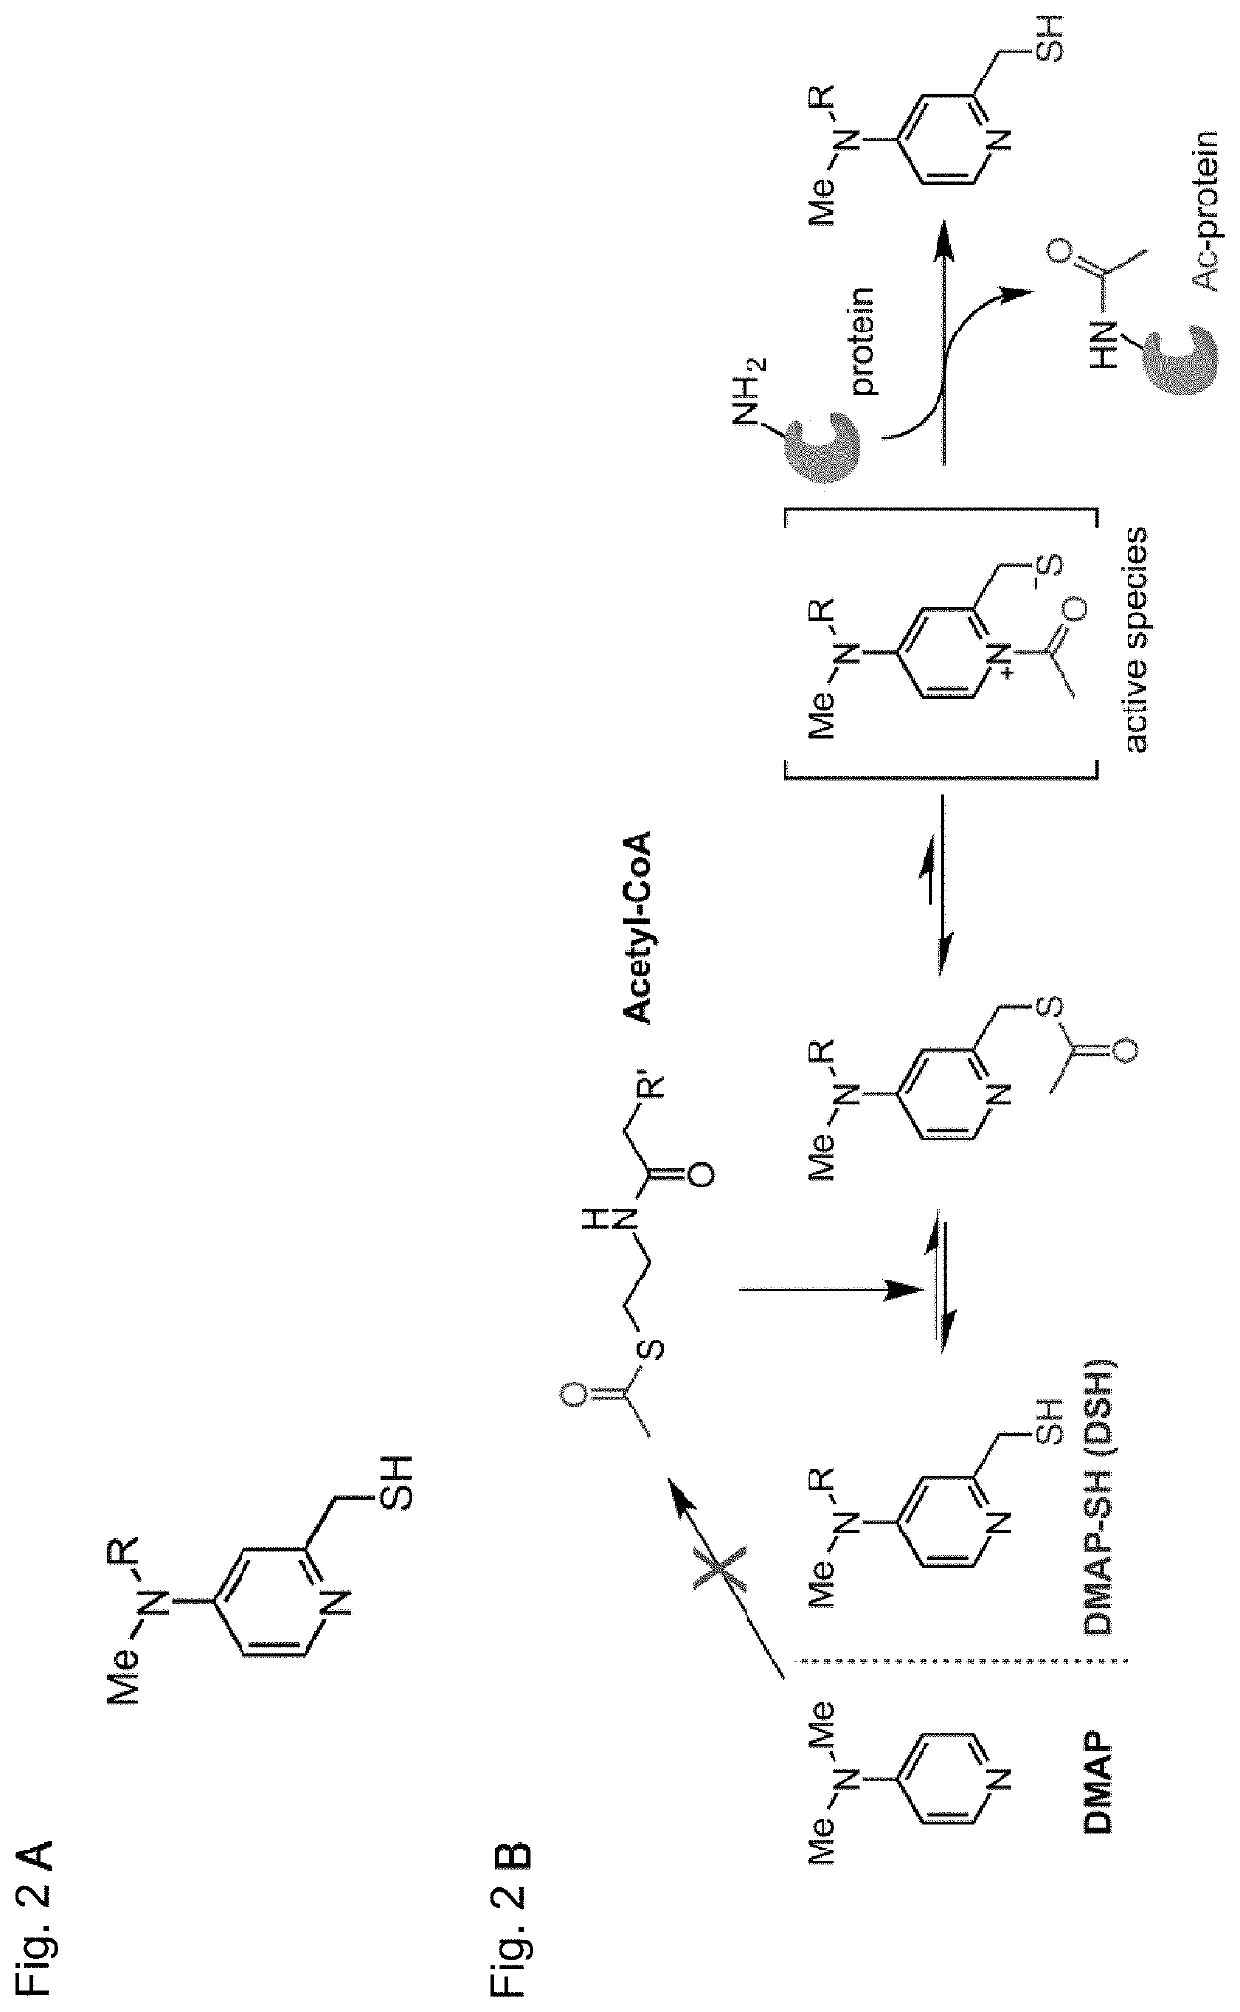 Artificial catalyst system for selective acylation of chromosome protein